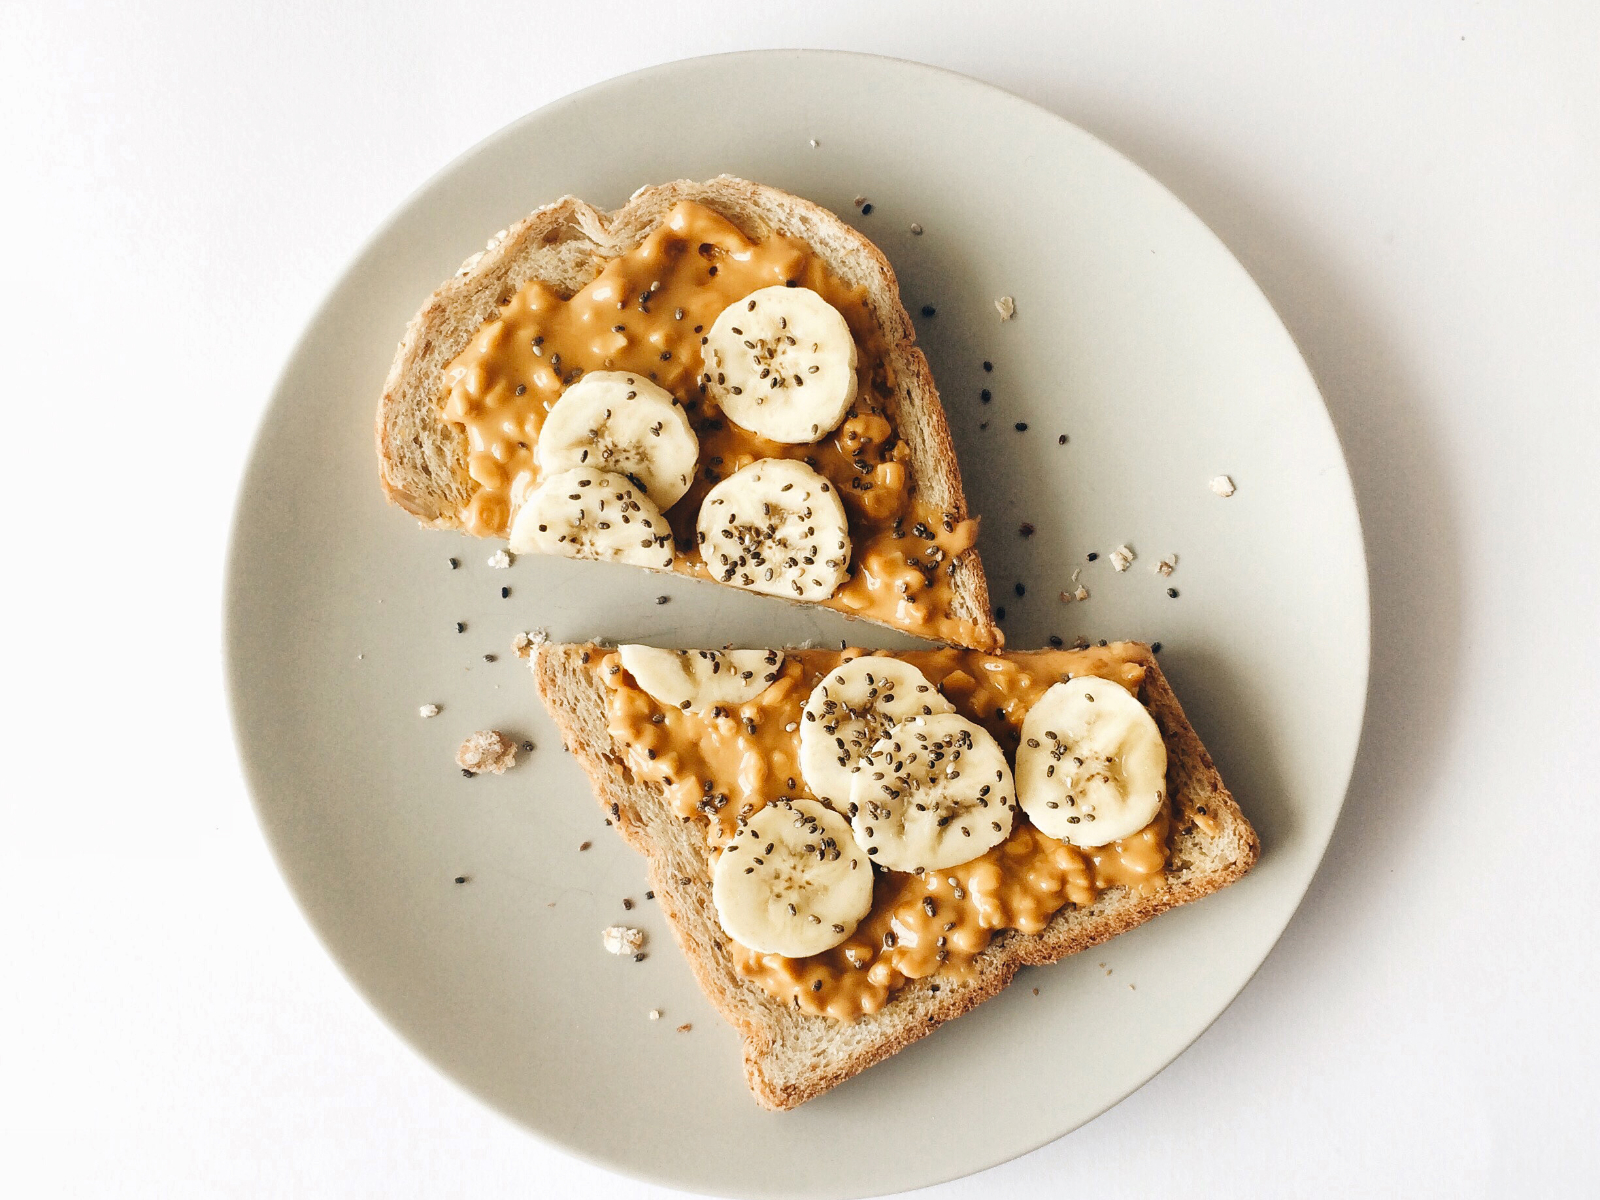 Whole grain toast with almond butter and sliced banana